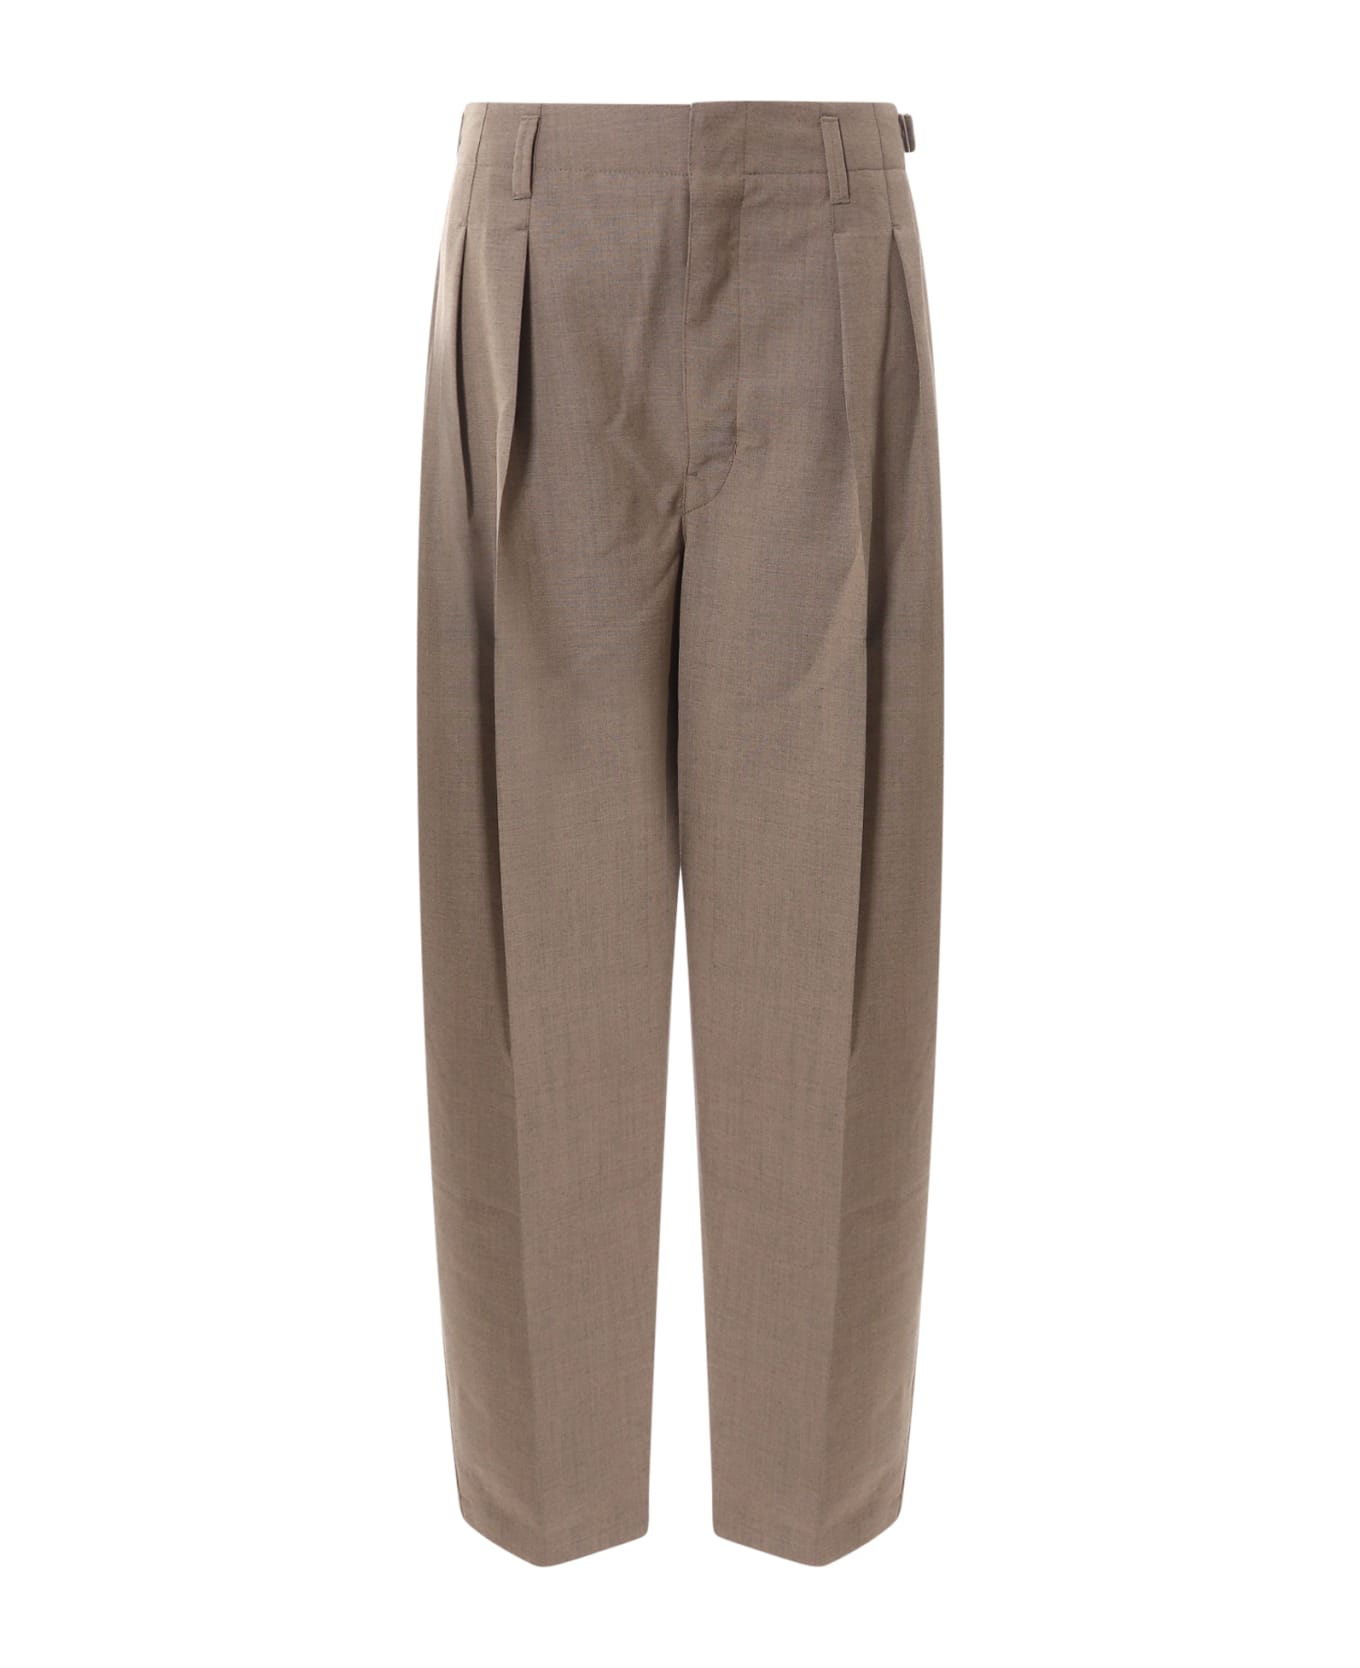 Lemaire Trouser - BROWN ボトムス